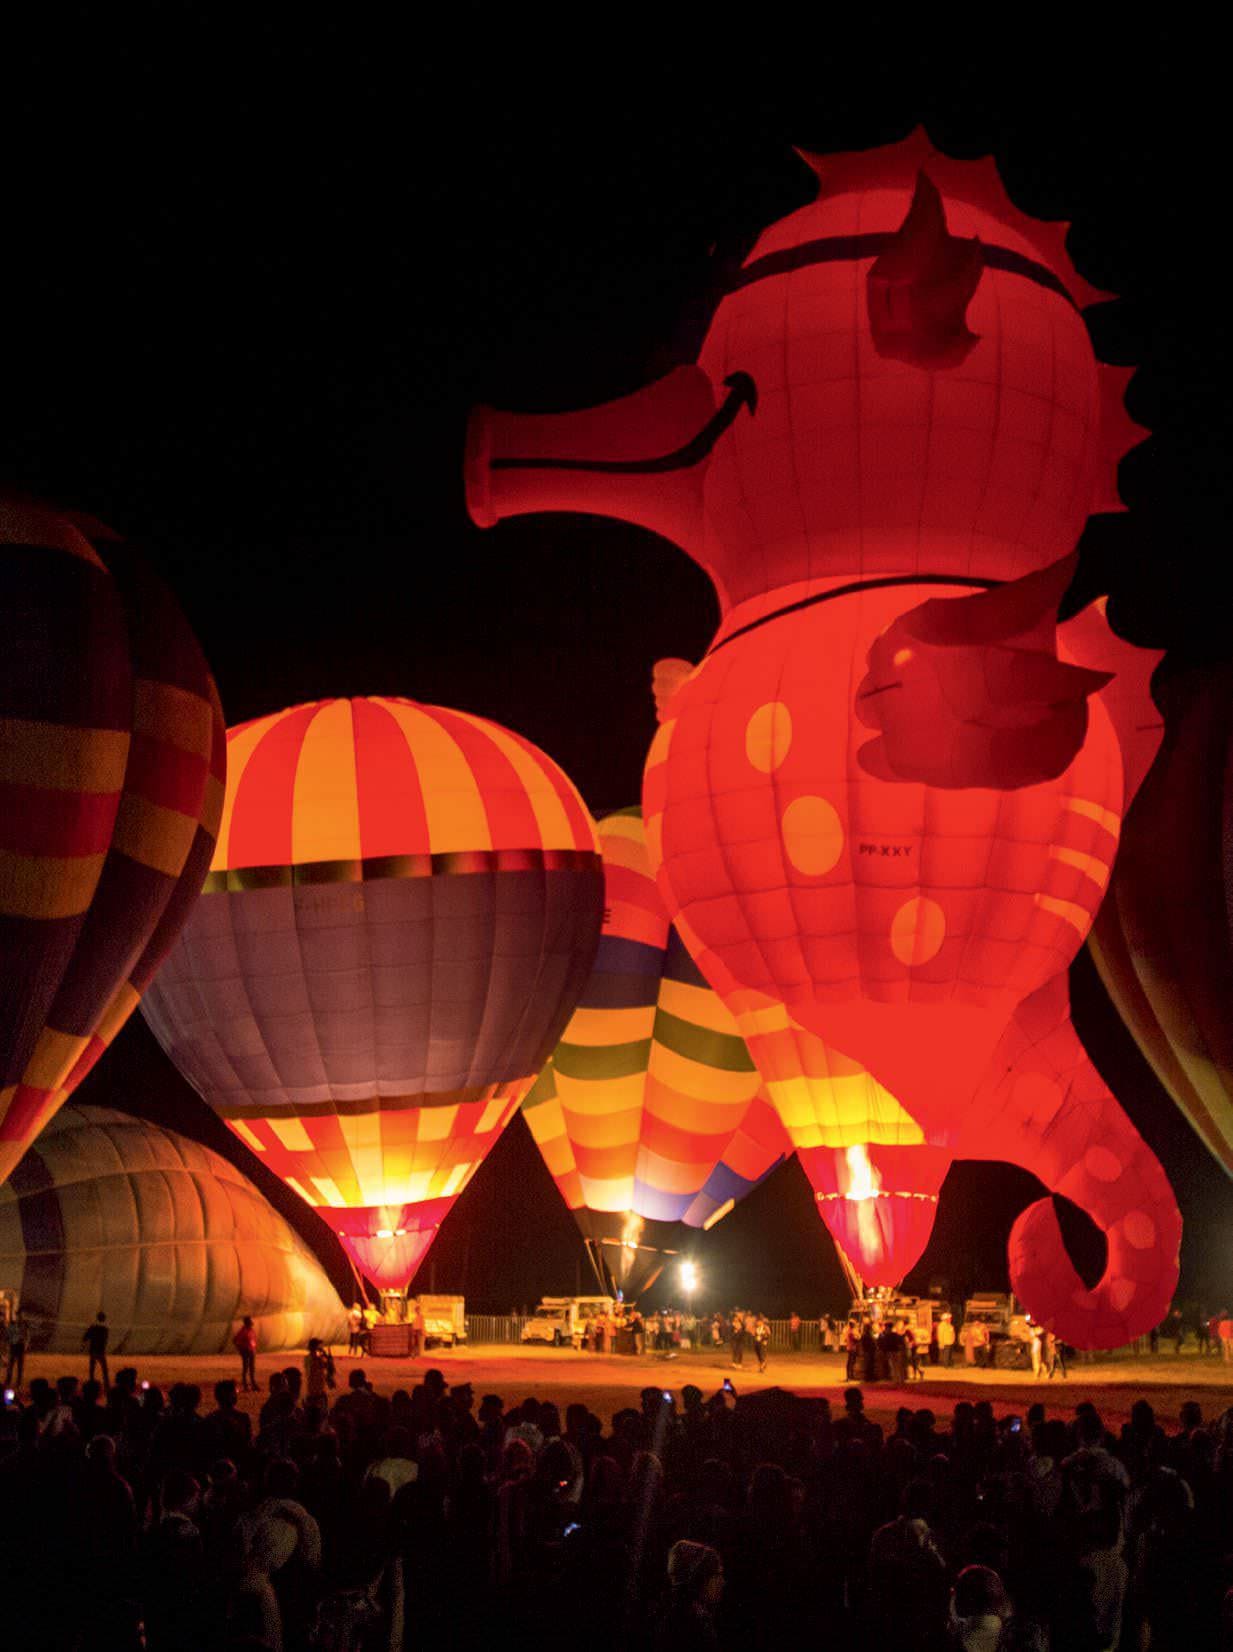 The tethered flight sessions set the night aglow and enchant the hundreds of visitors in attendance